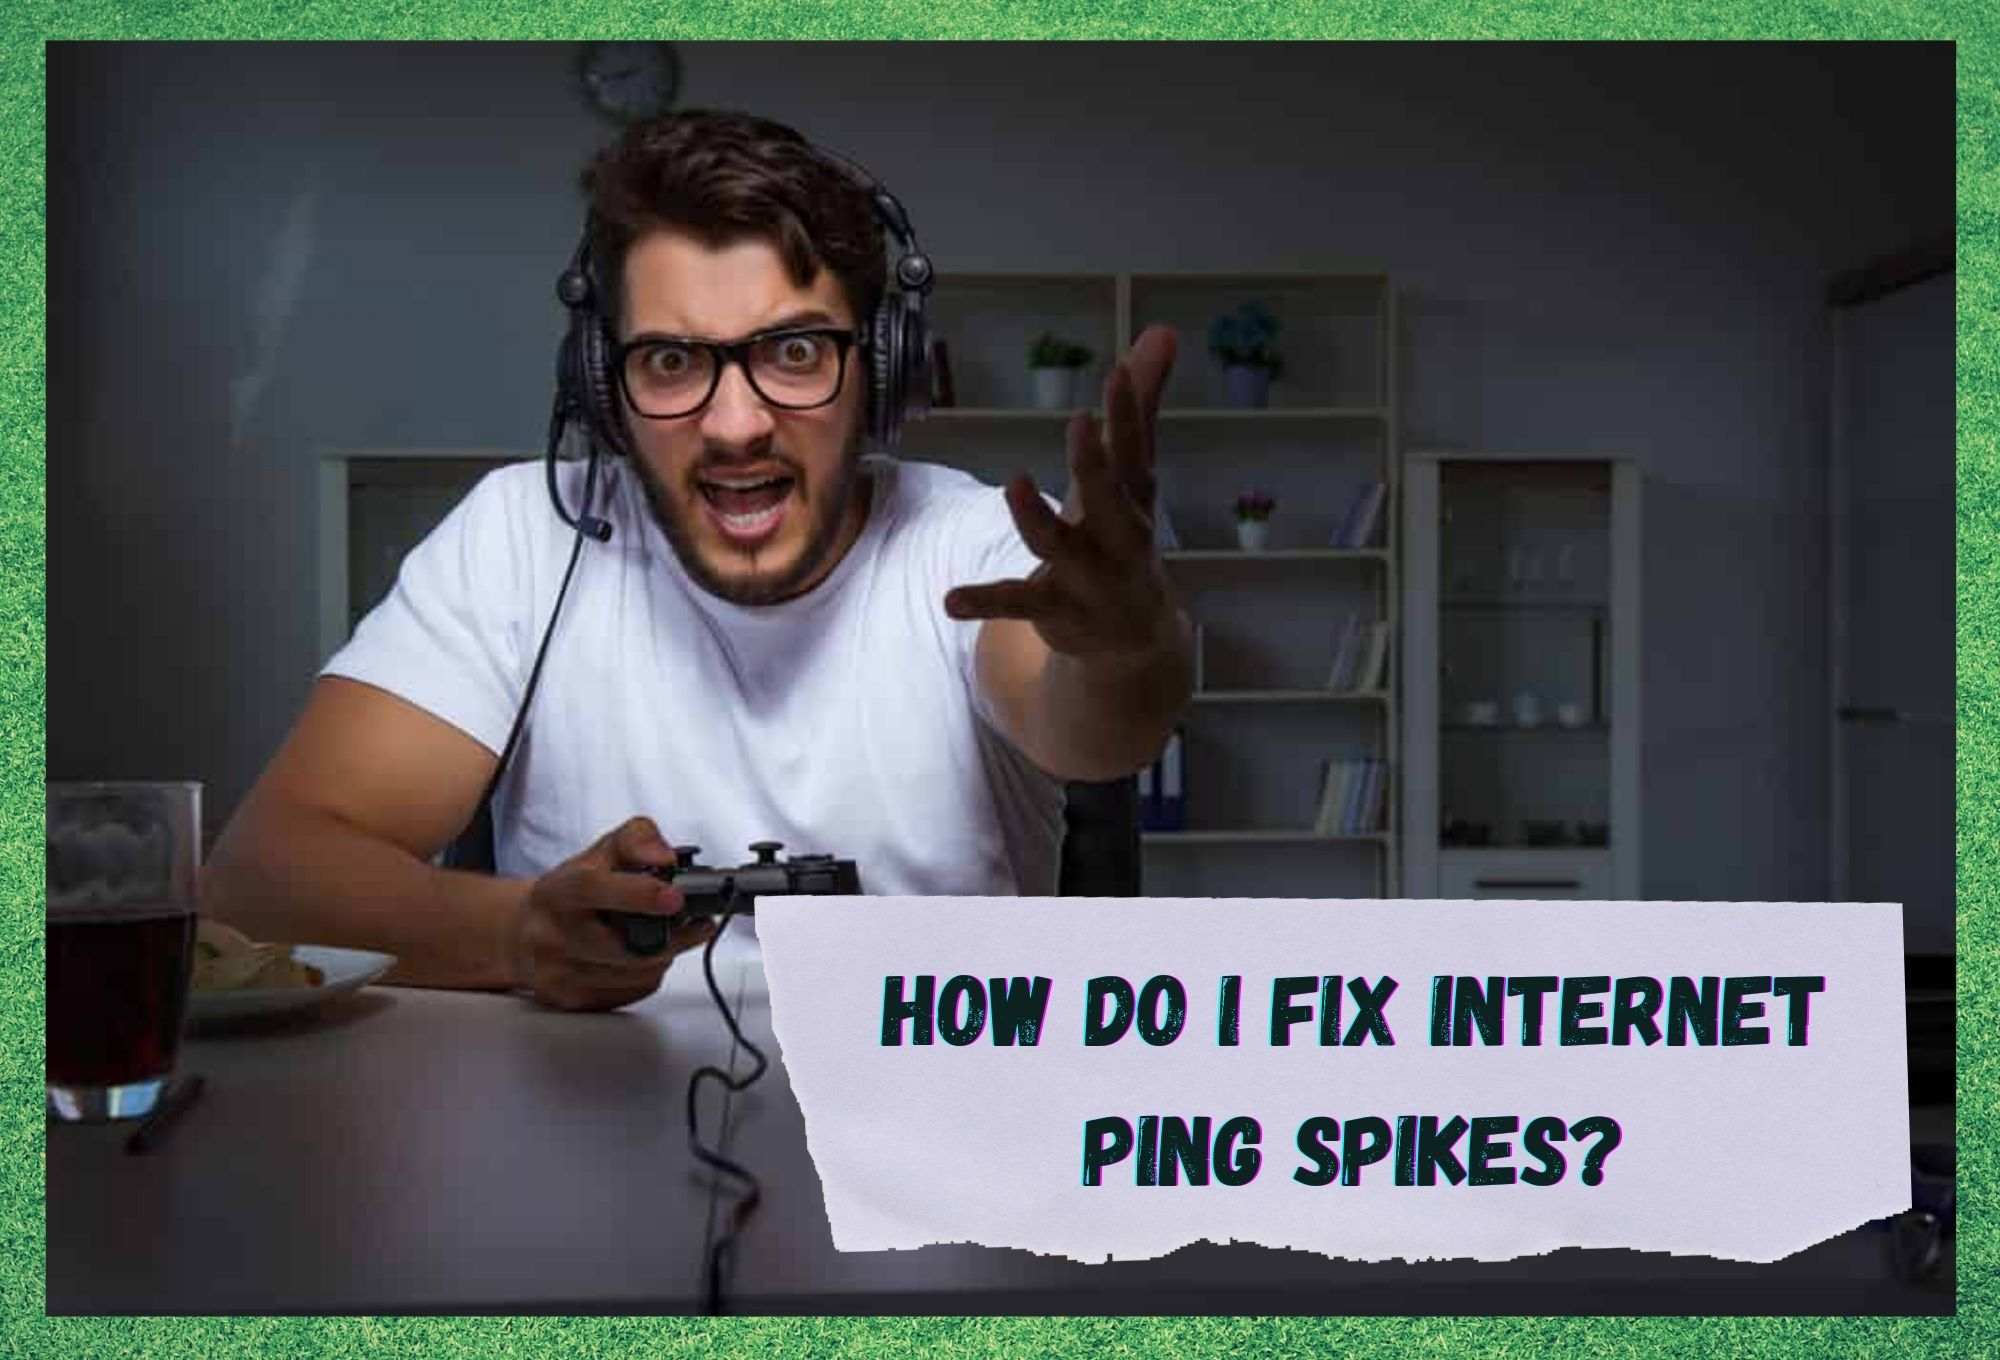 How To Fix Internet Ping Spikes? - Internet Access Guide